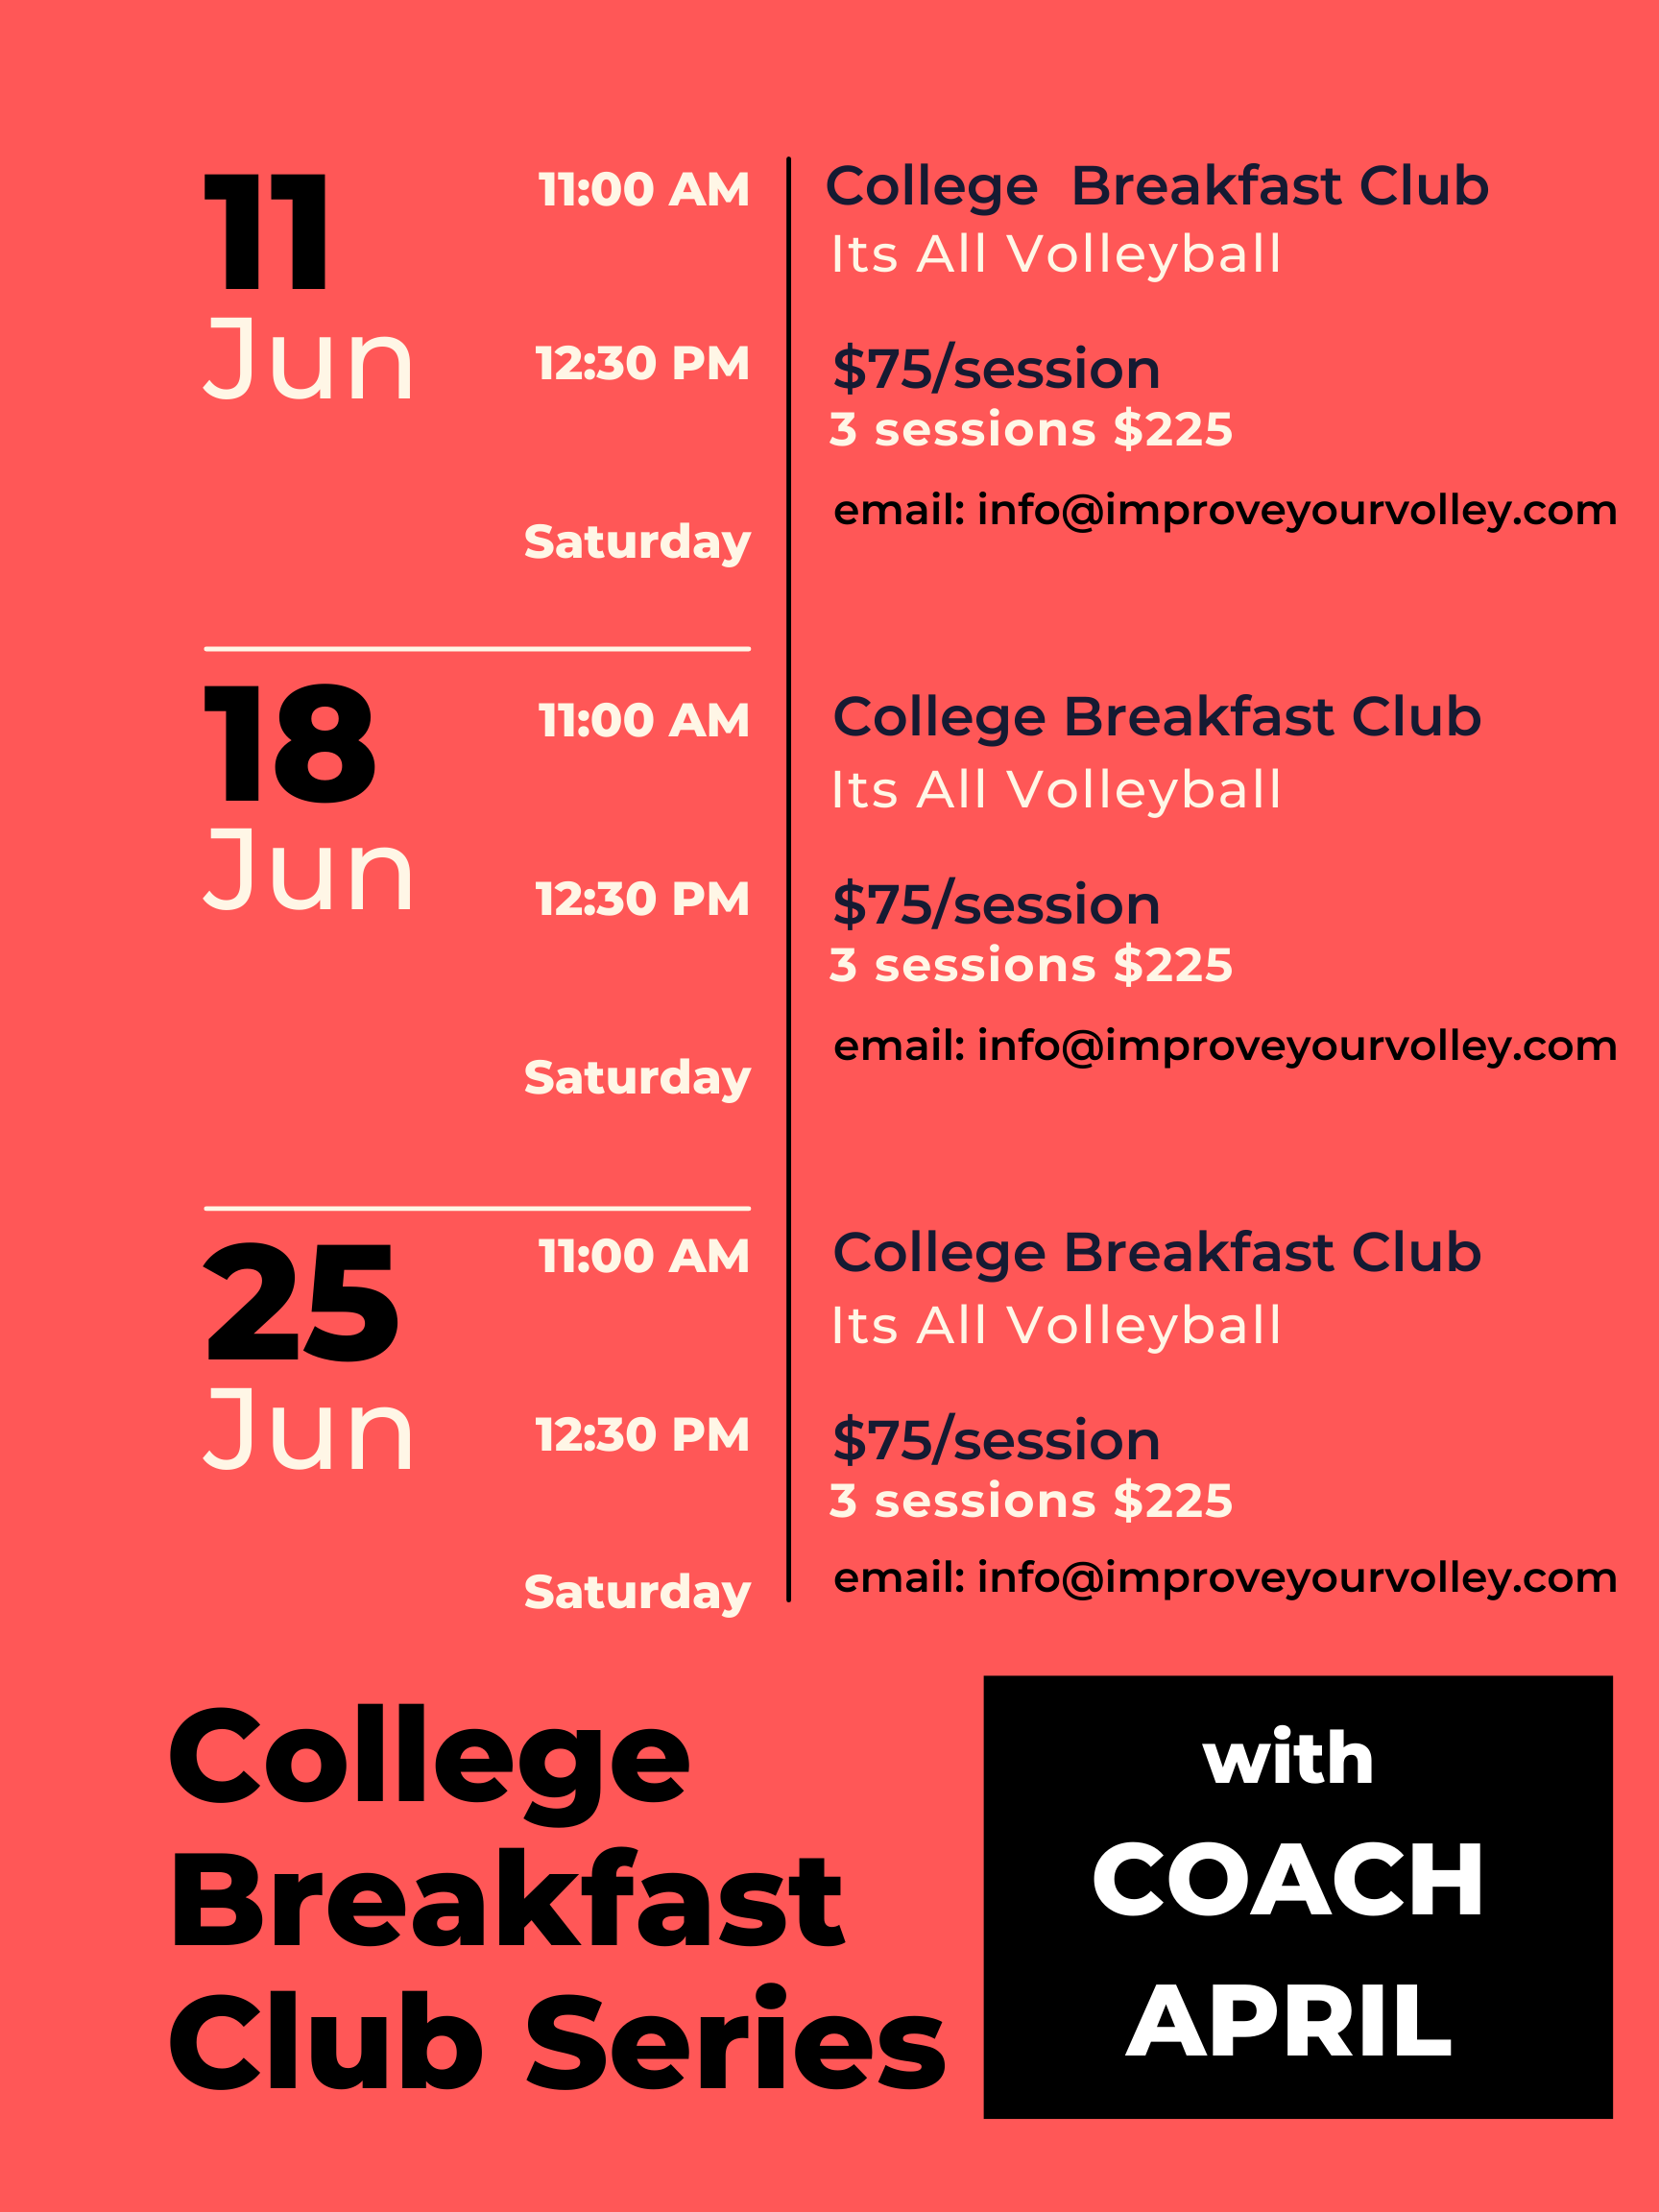 I'm offering volleyball coaching in 2021 for experienced players age 9-12,13-18. Private one-on-one and small group training. Email info@improveyourvolley.com. 